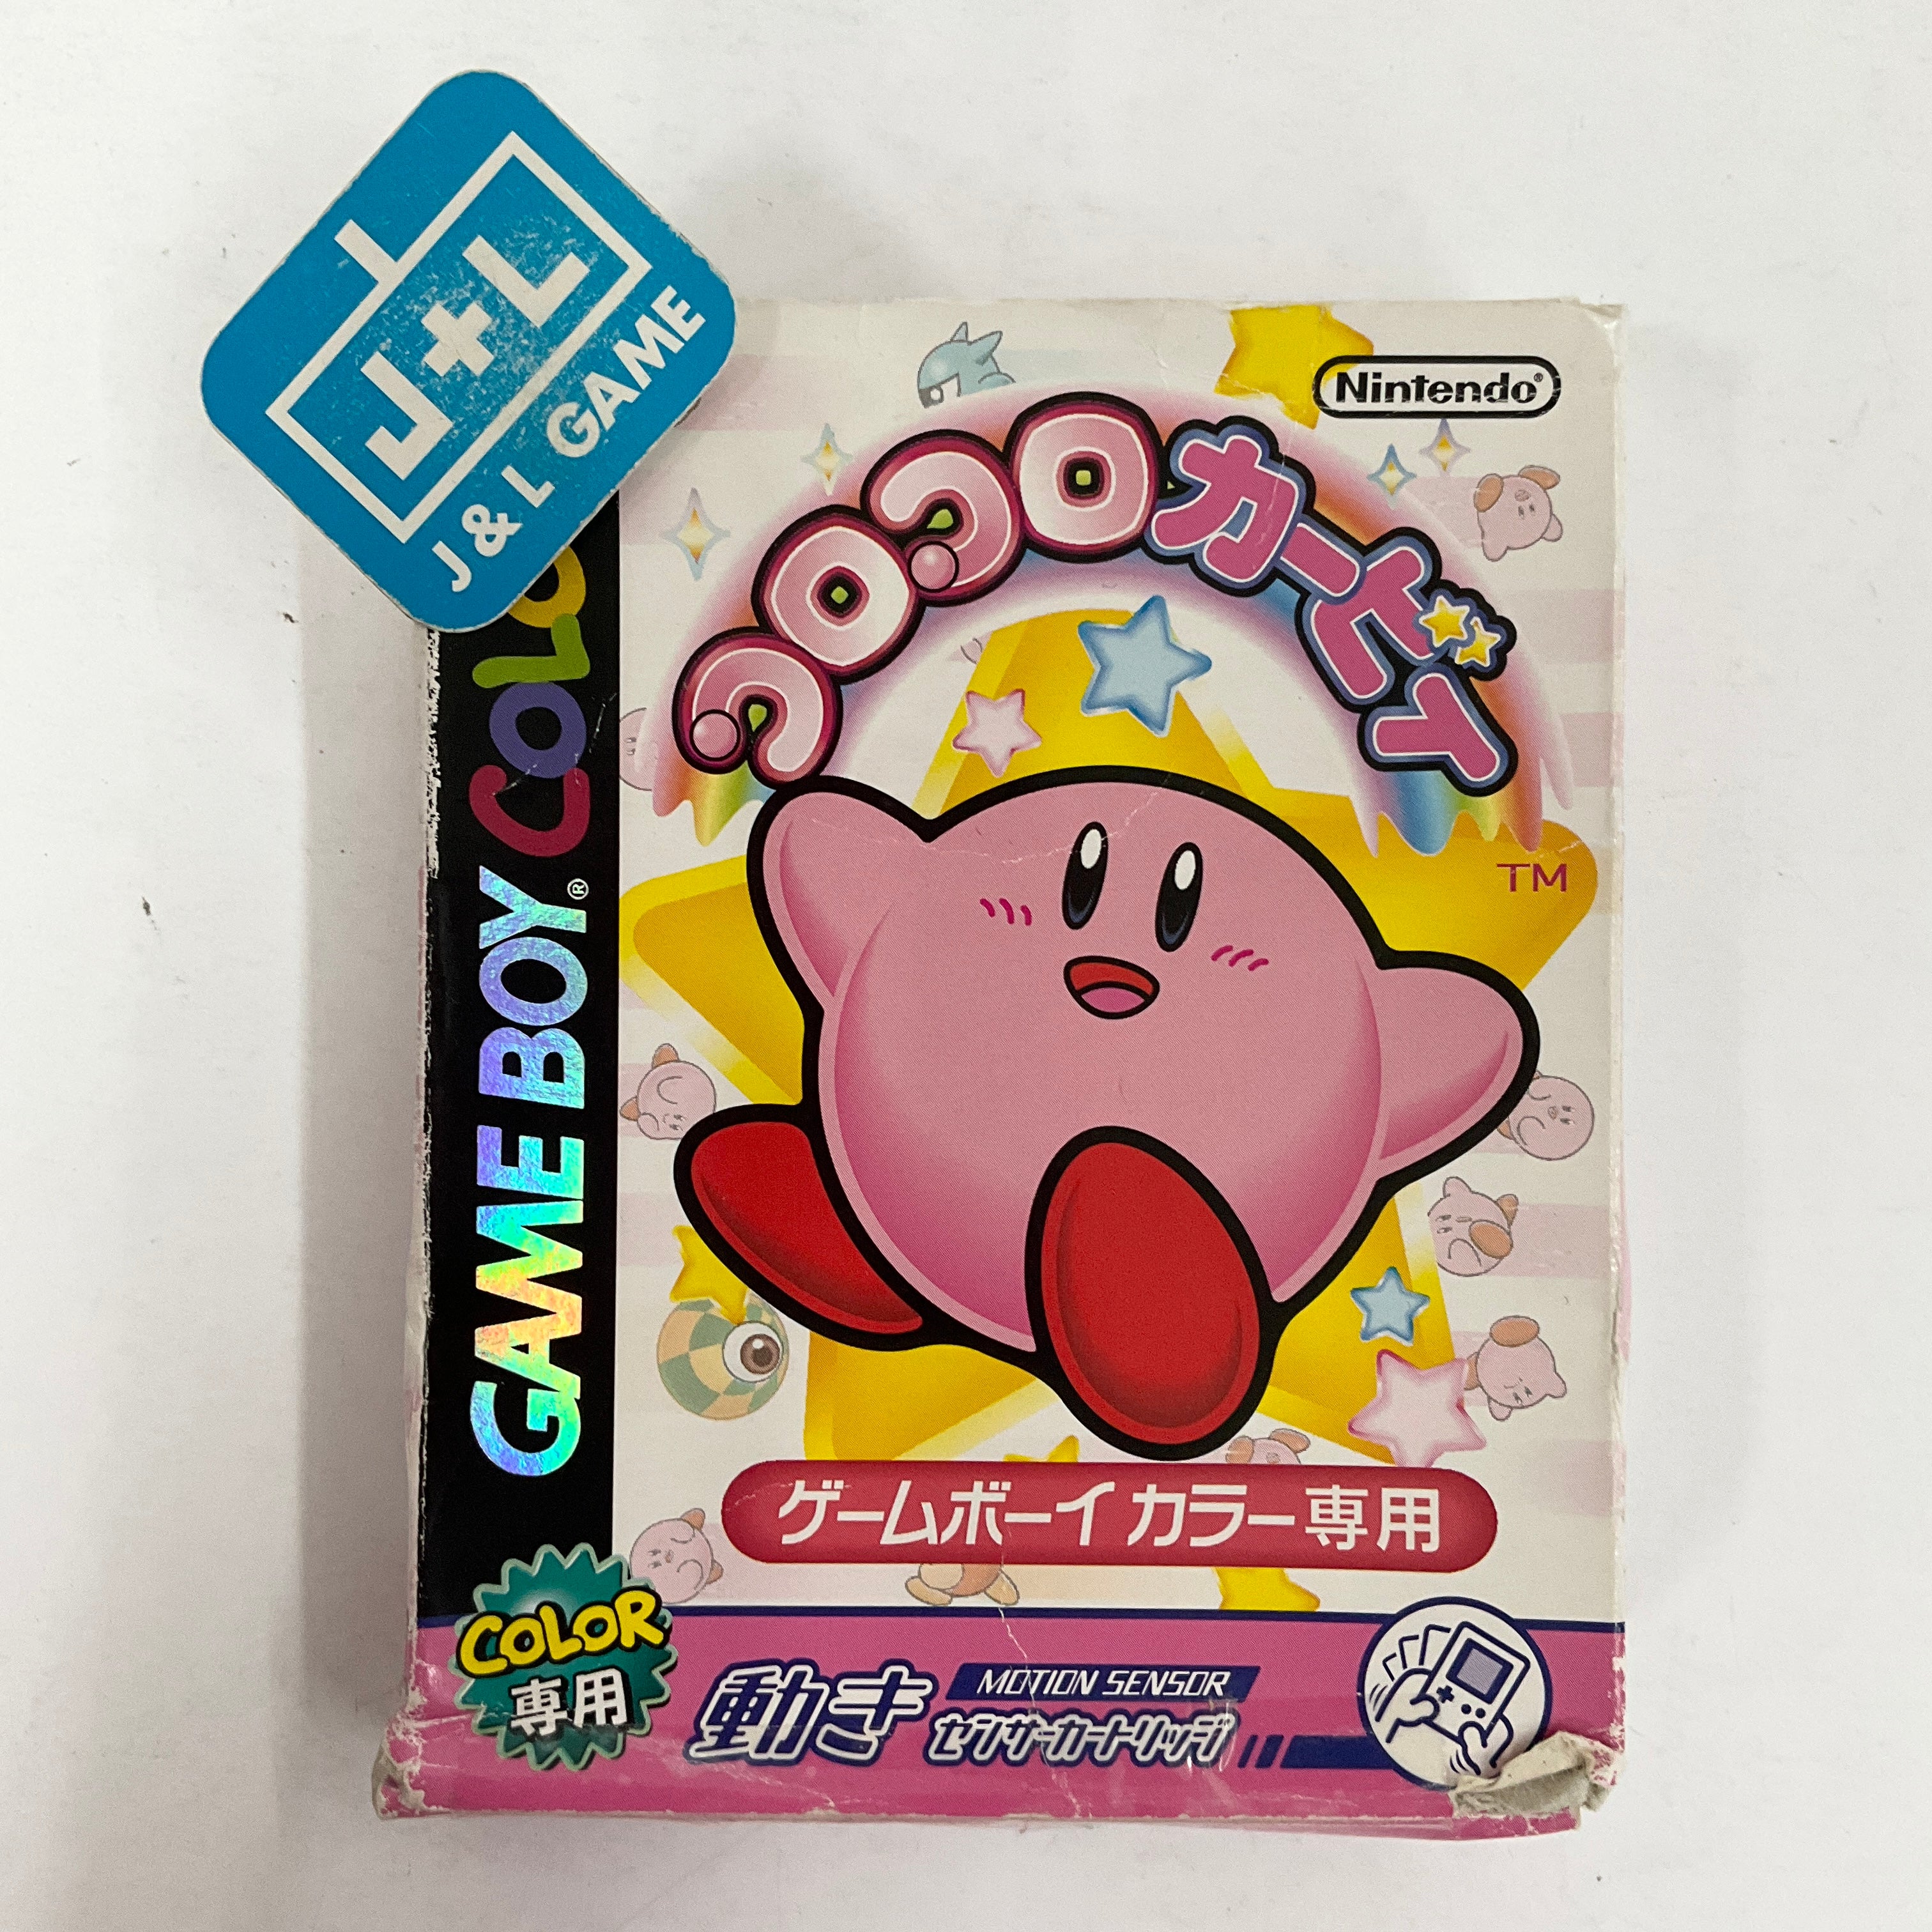 Koro Koro Kirby - (GBC) Game Boy Color [Pre-Owned] (Japanese Import)